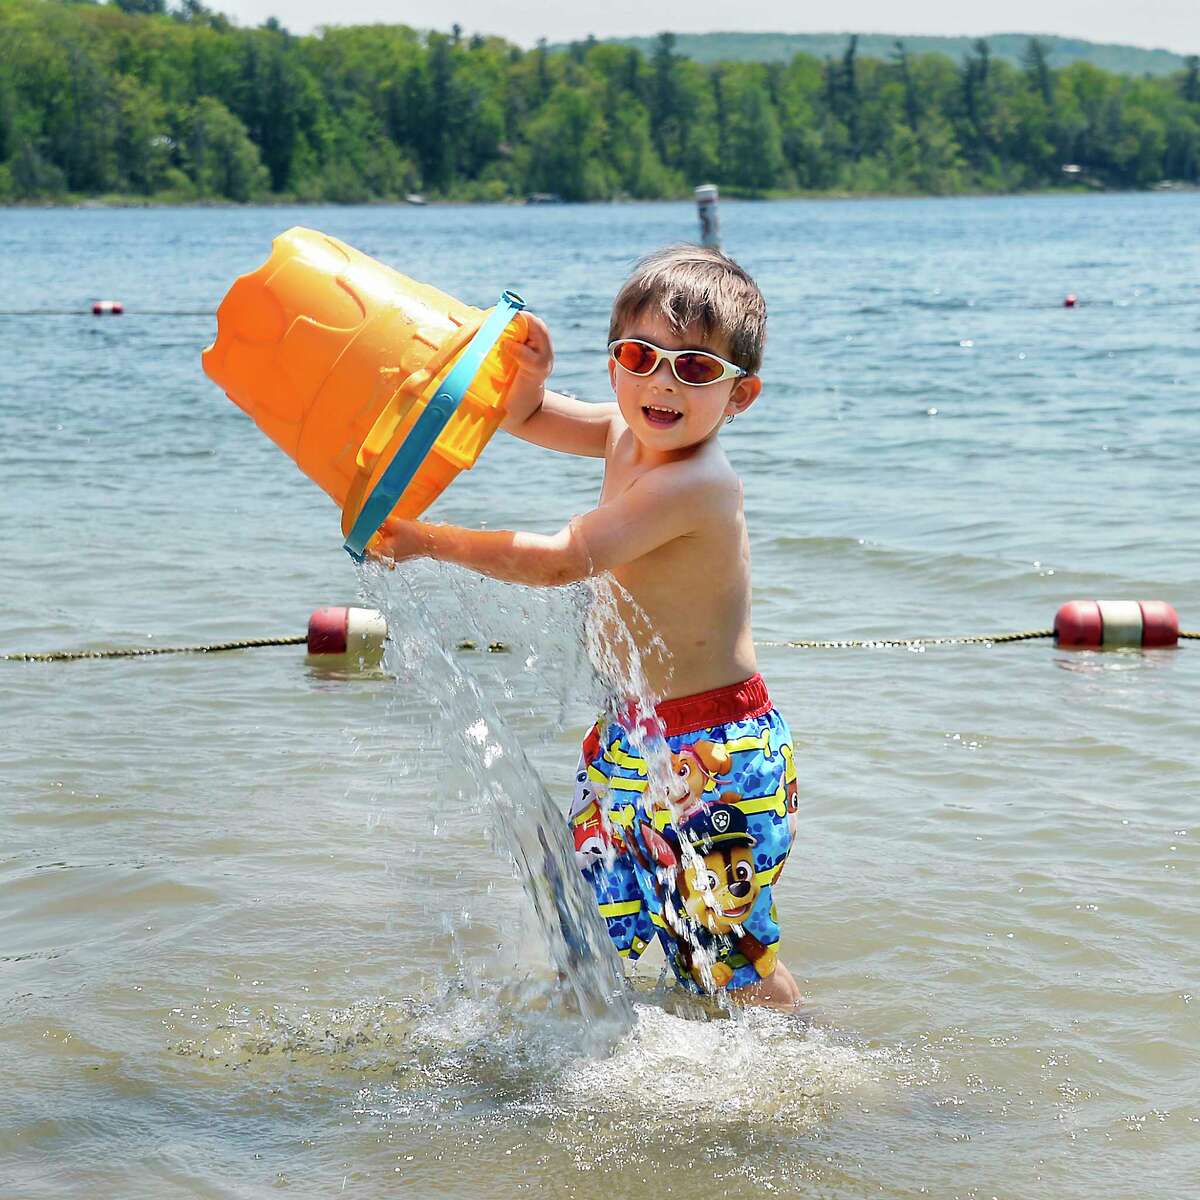 Looking for ways to cool off in the heat wave? Here are a few suggestions.